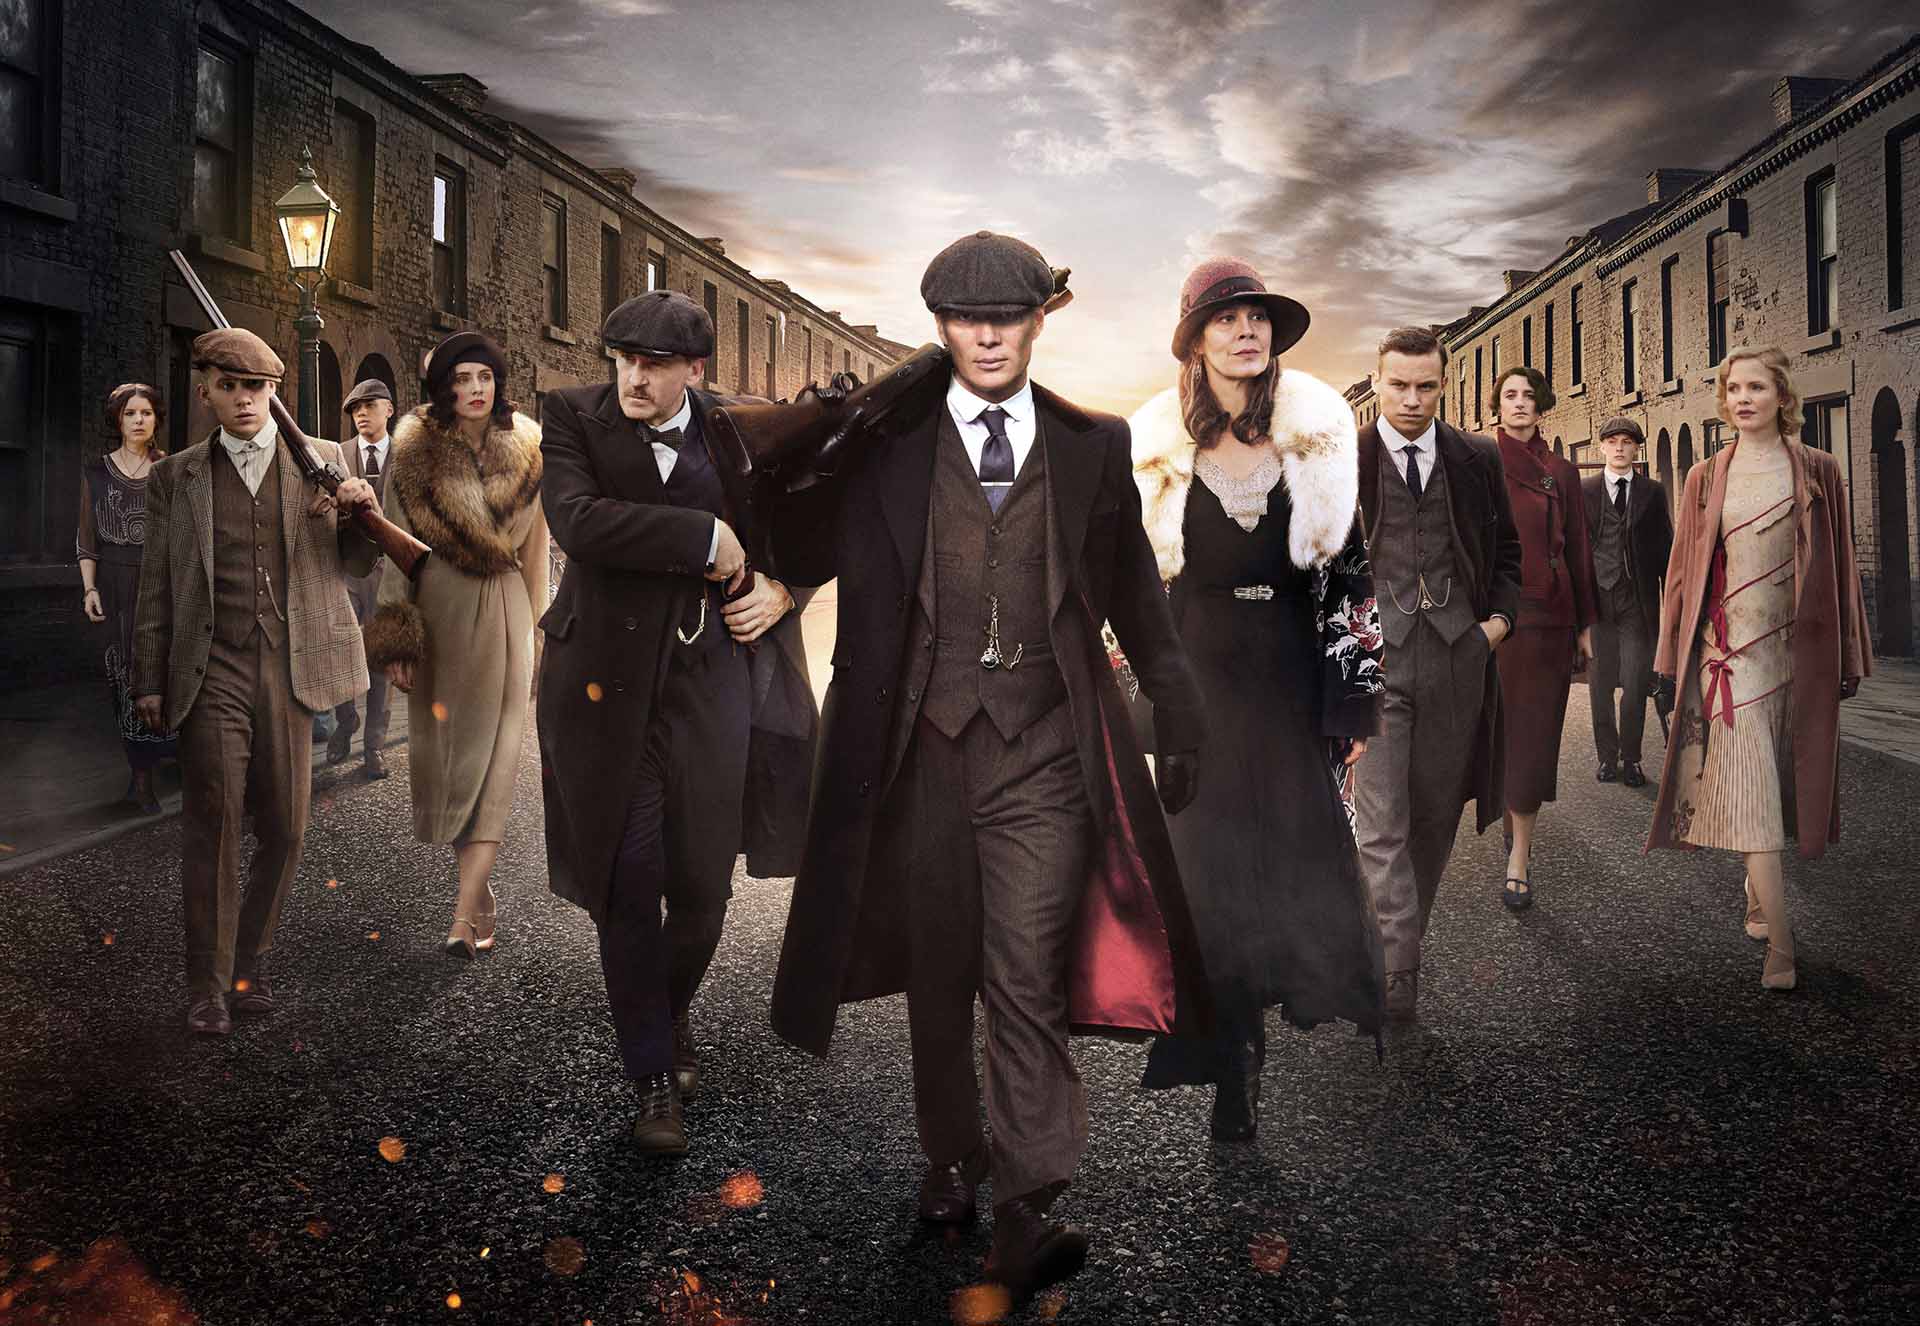 Peaky Blinders Season 6 Vostfr Peaky Blinders Season 6: Here's Everything That You Need to Know So Far!